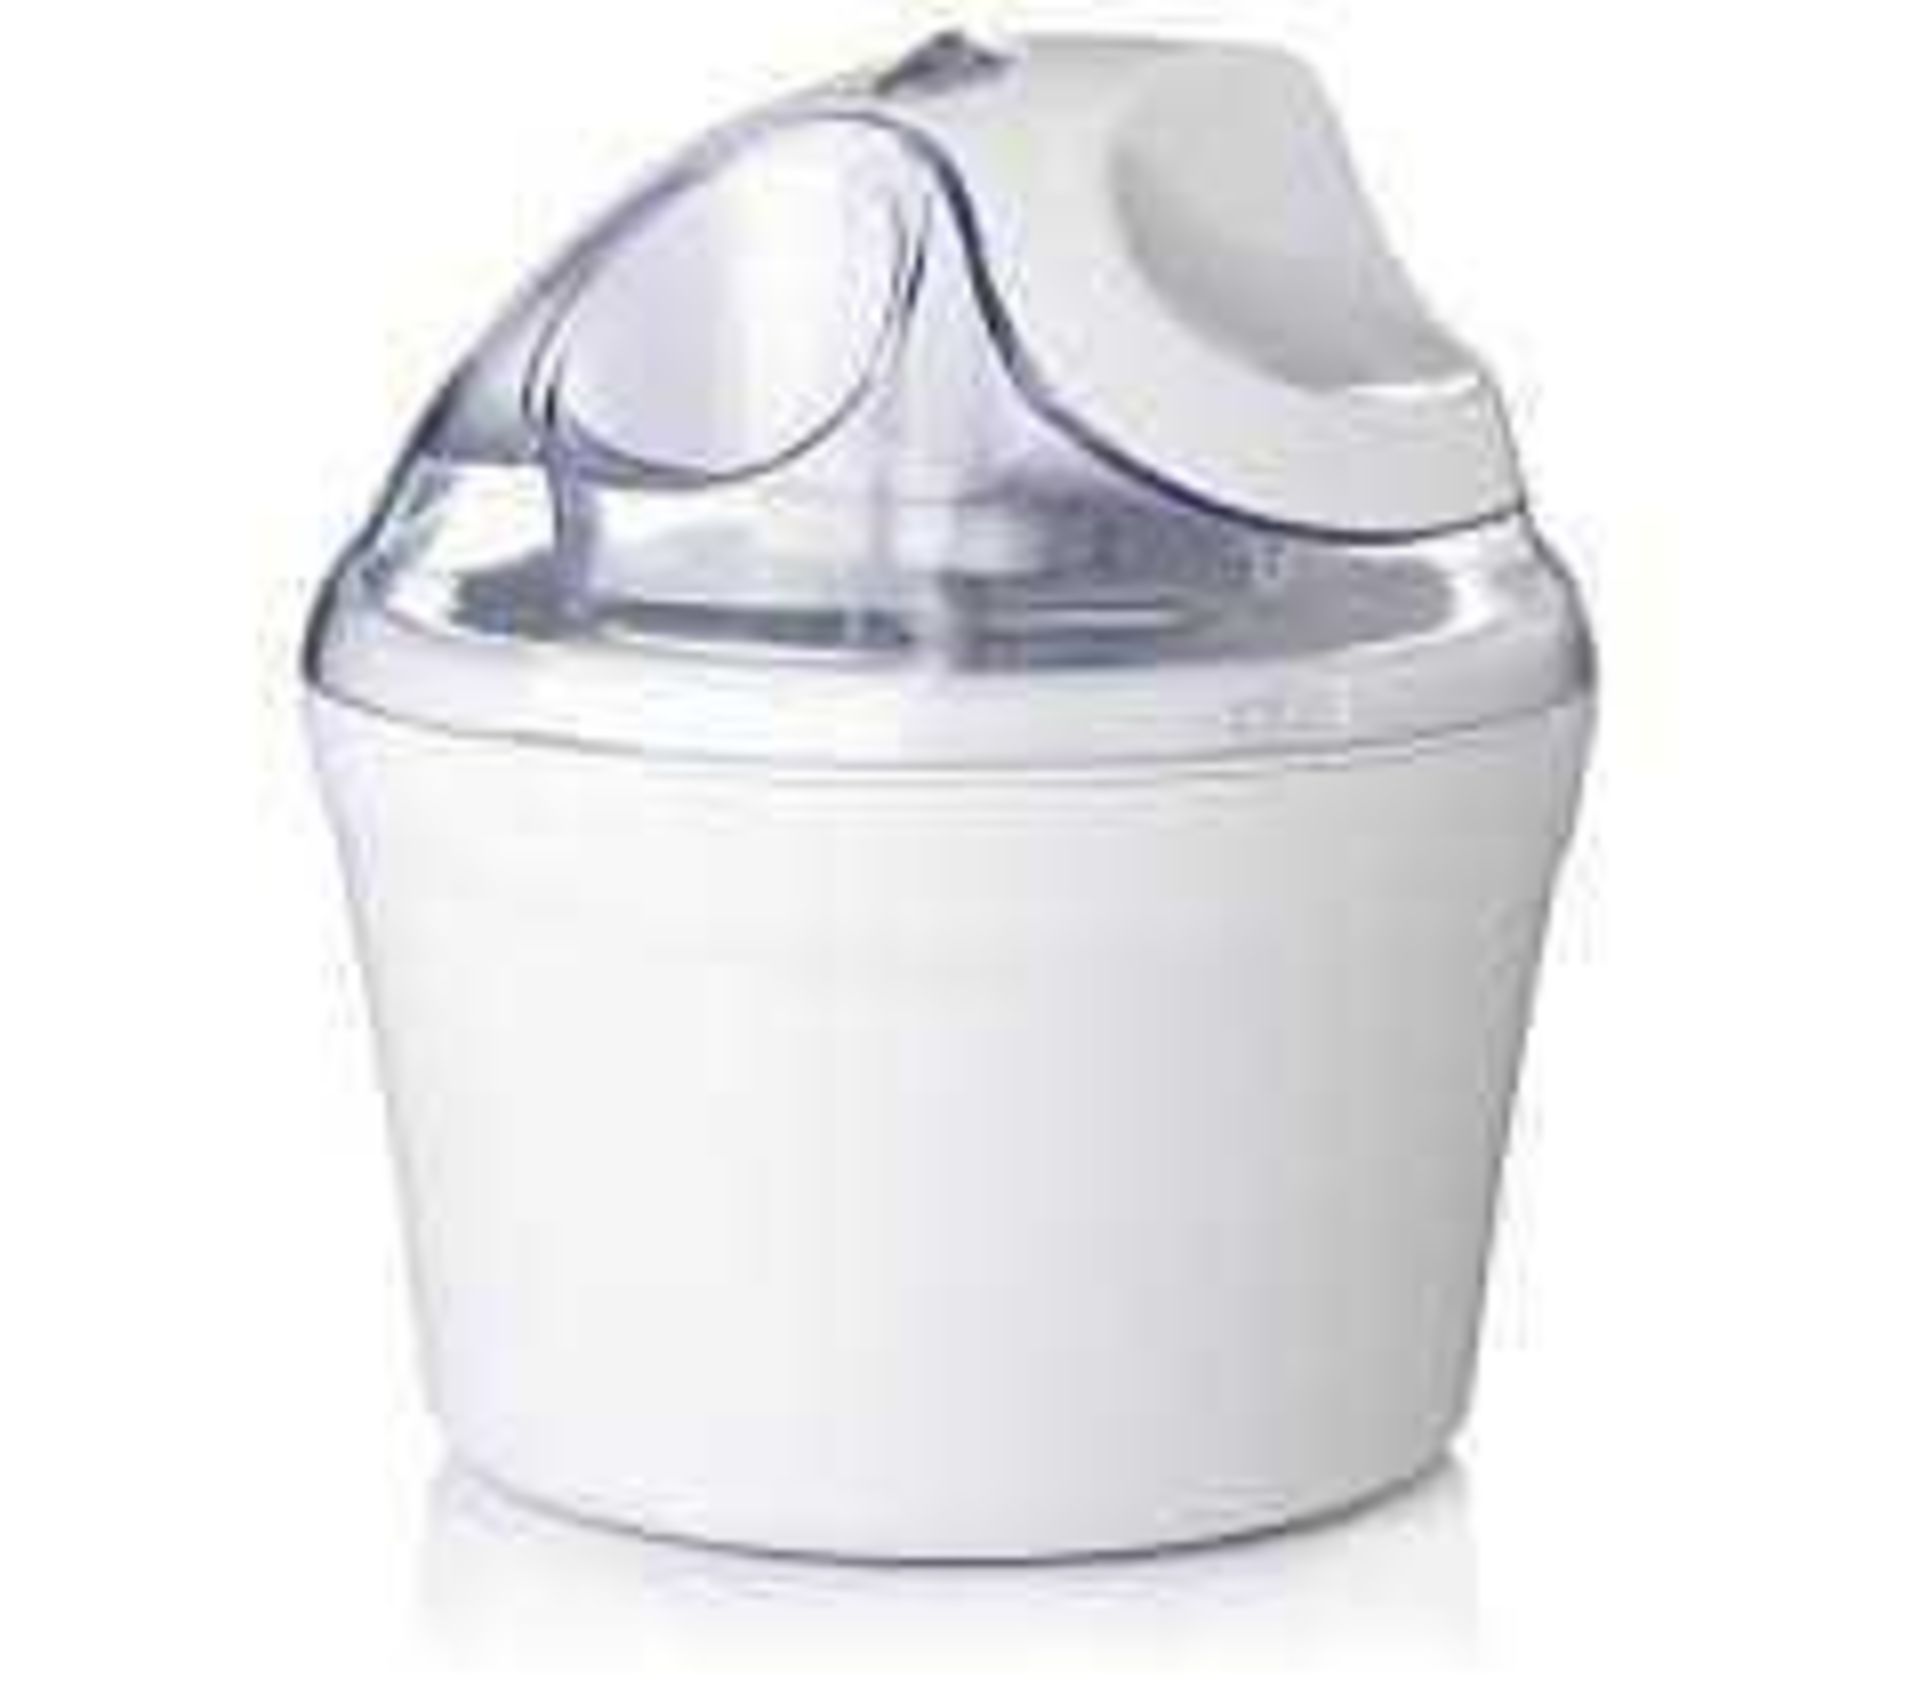 RRP £60 Boxed Cooks Essentials Ice Cream Maker (Appraisal Available On Request) (Pictures For